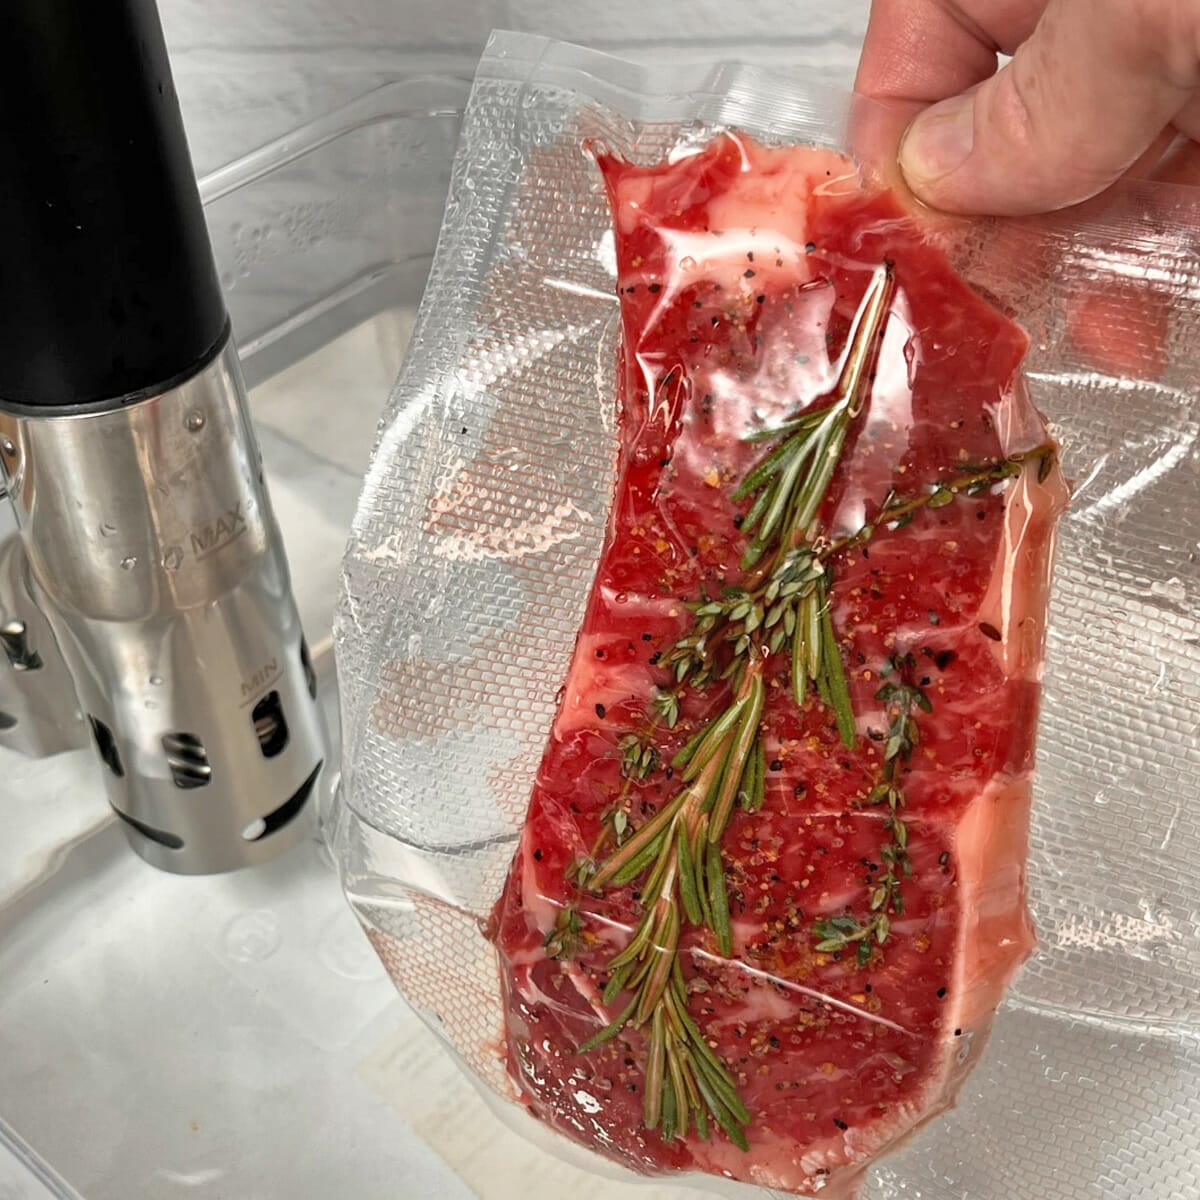 A Beginner's Guide to Sous Vide Cooking- Kitchen Conundrums with